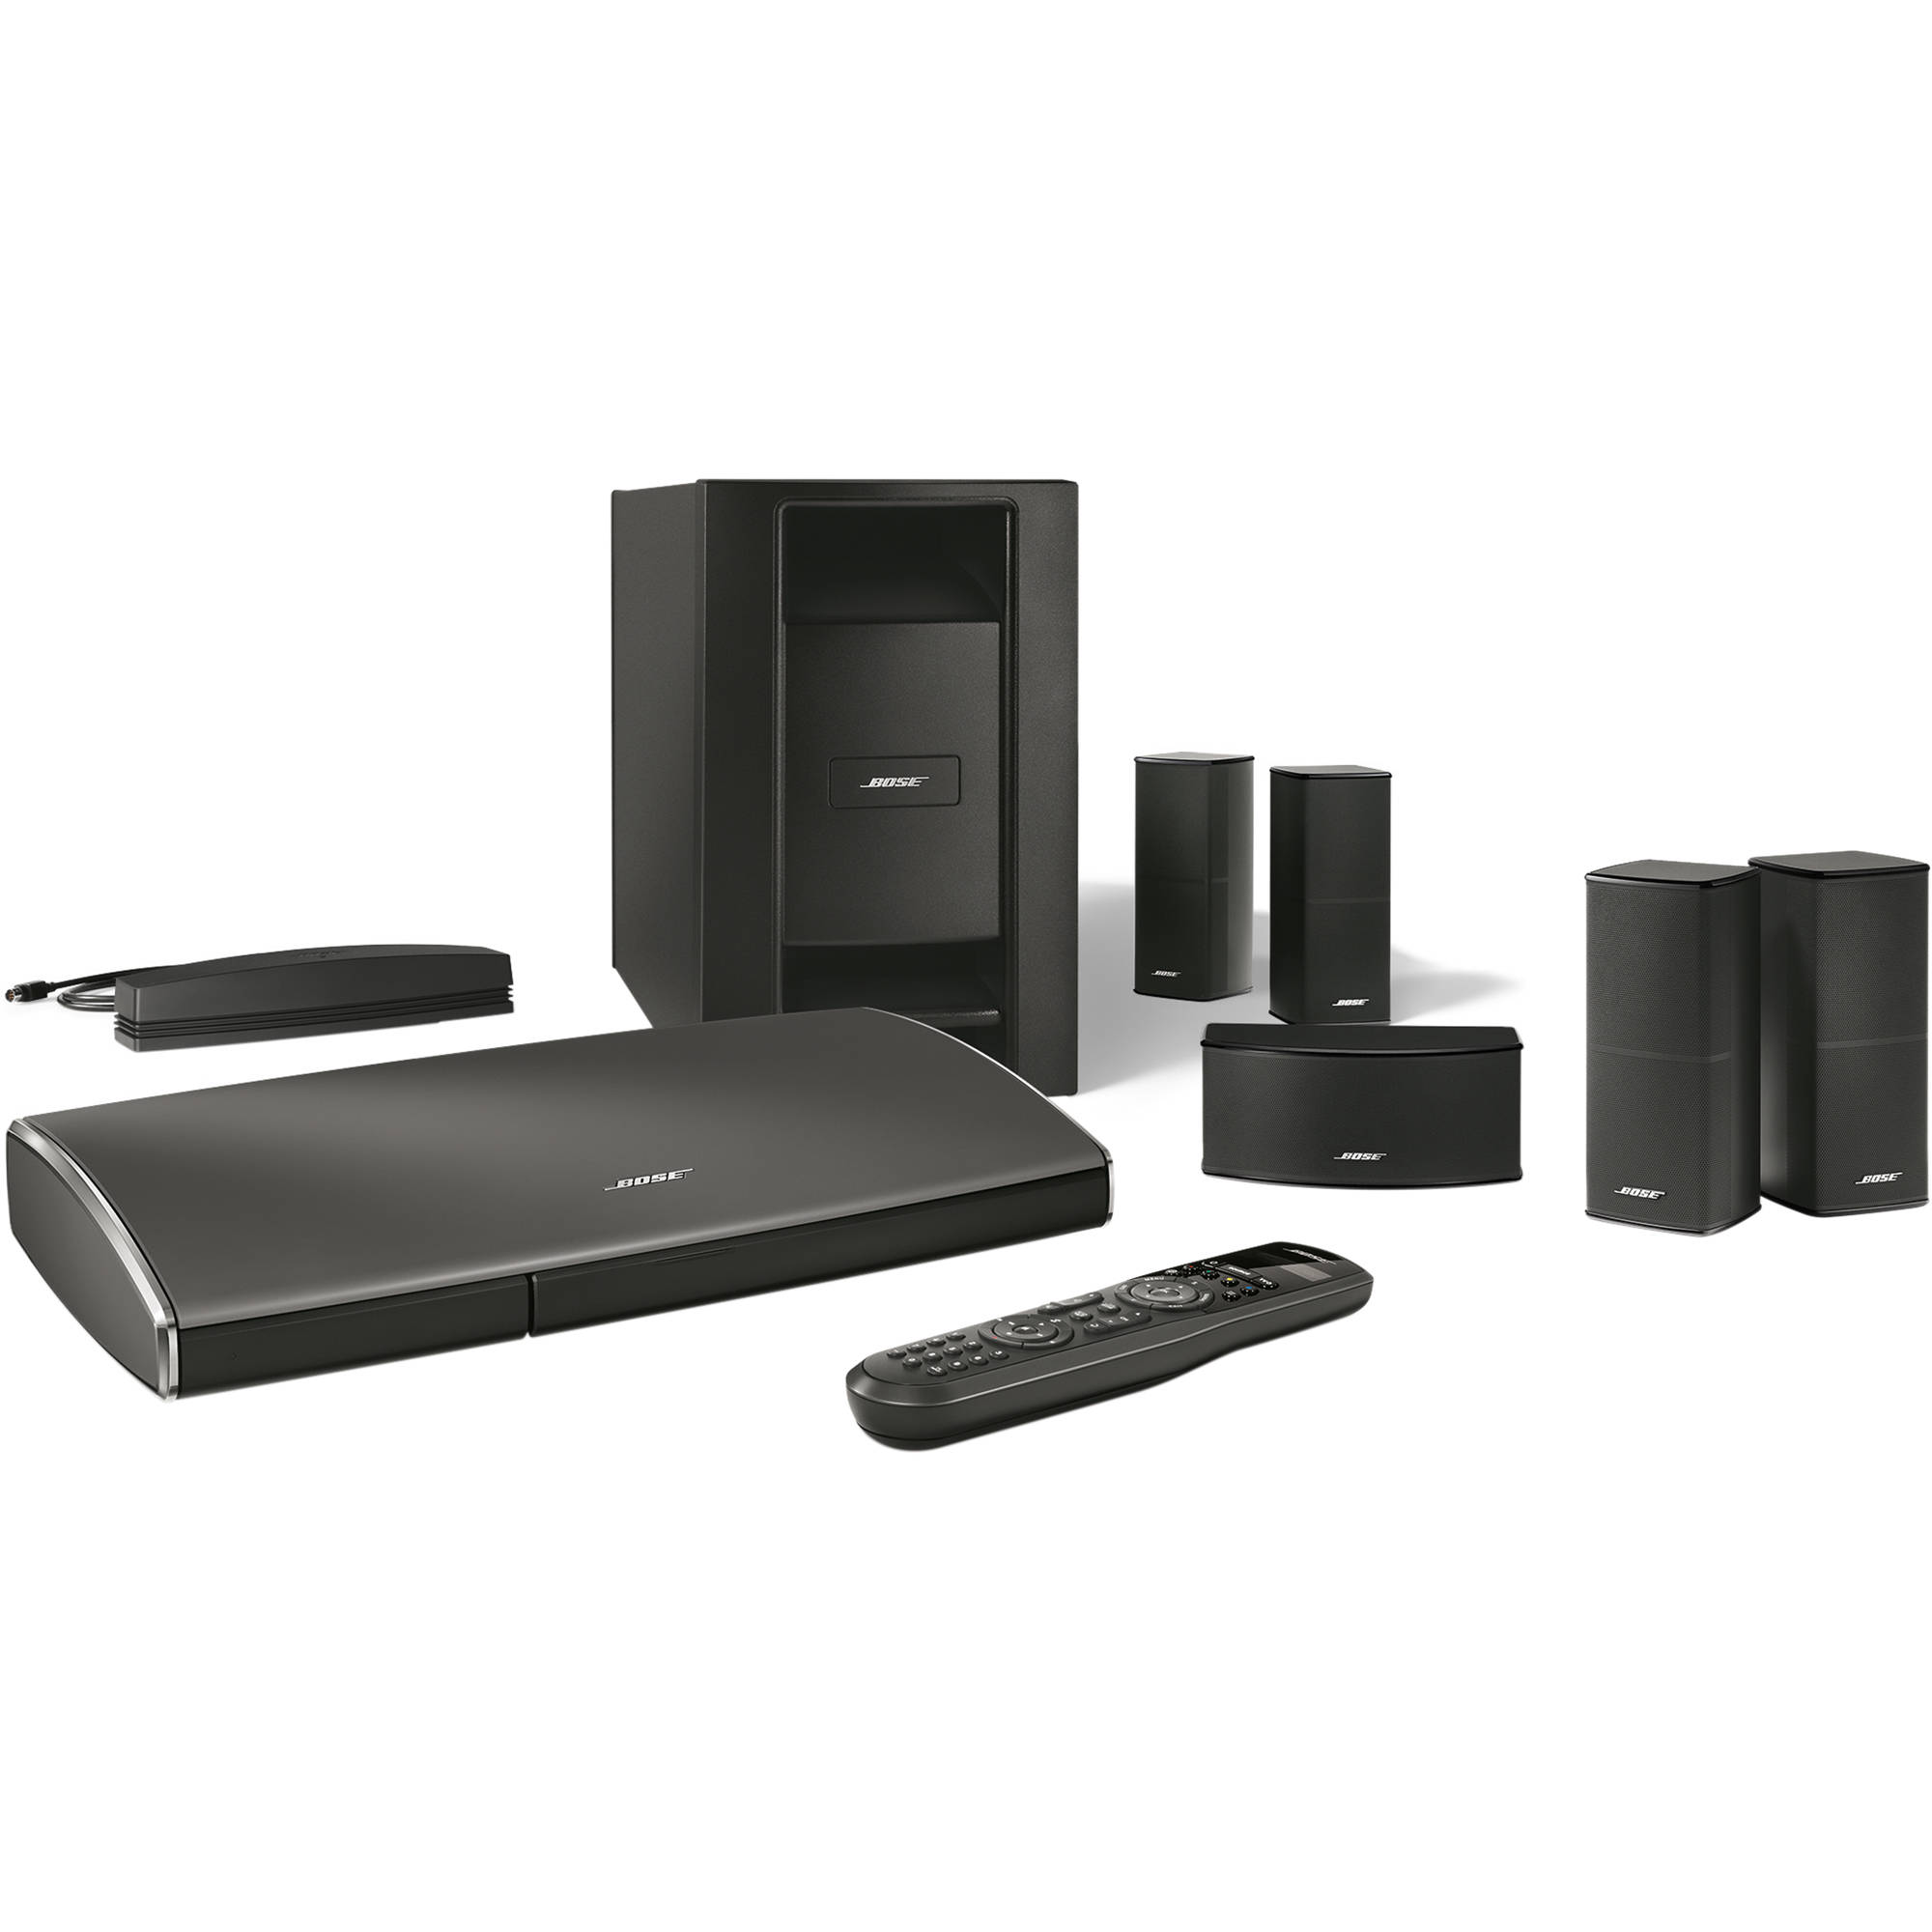 soundtouch home theater system